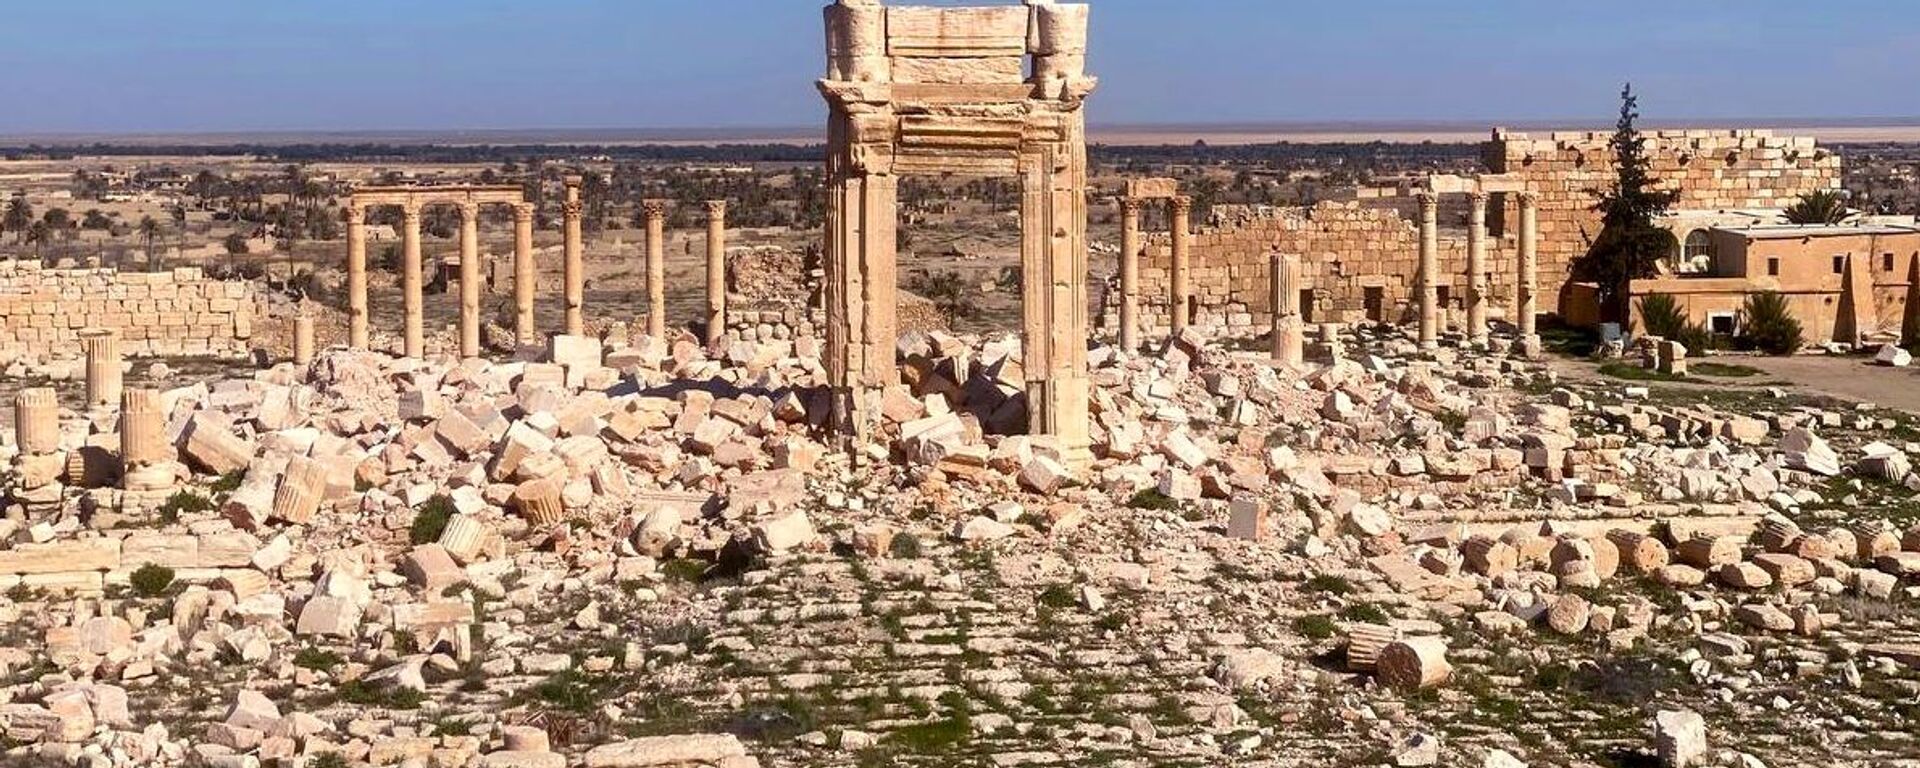 The view shows ruins of Palmyra, an ancient Semitic city and historical architectural monument in present-day Homs Governorate, outside Damascus, Syria. - Sputnik International, 1920, 30.04.2021